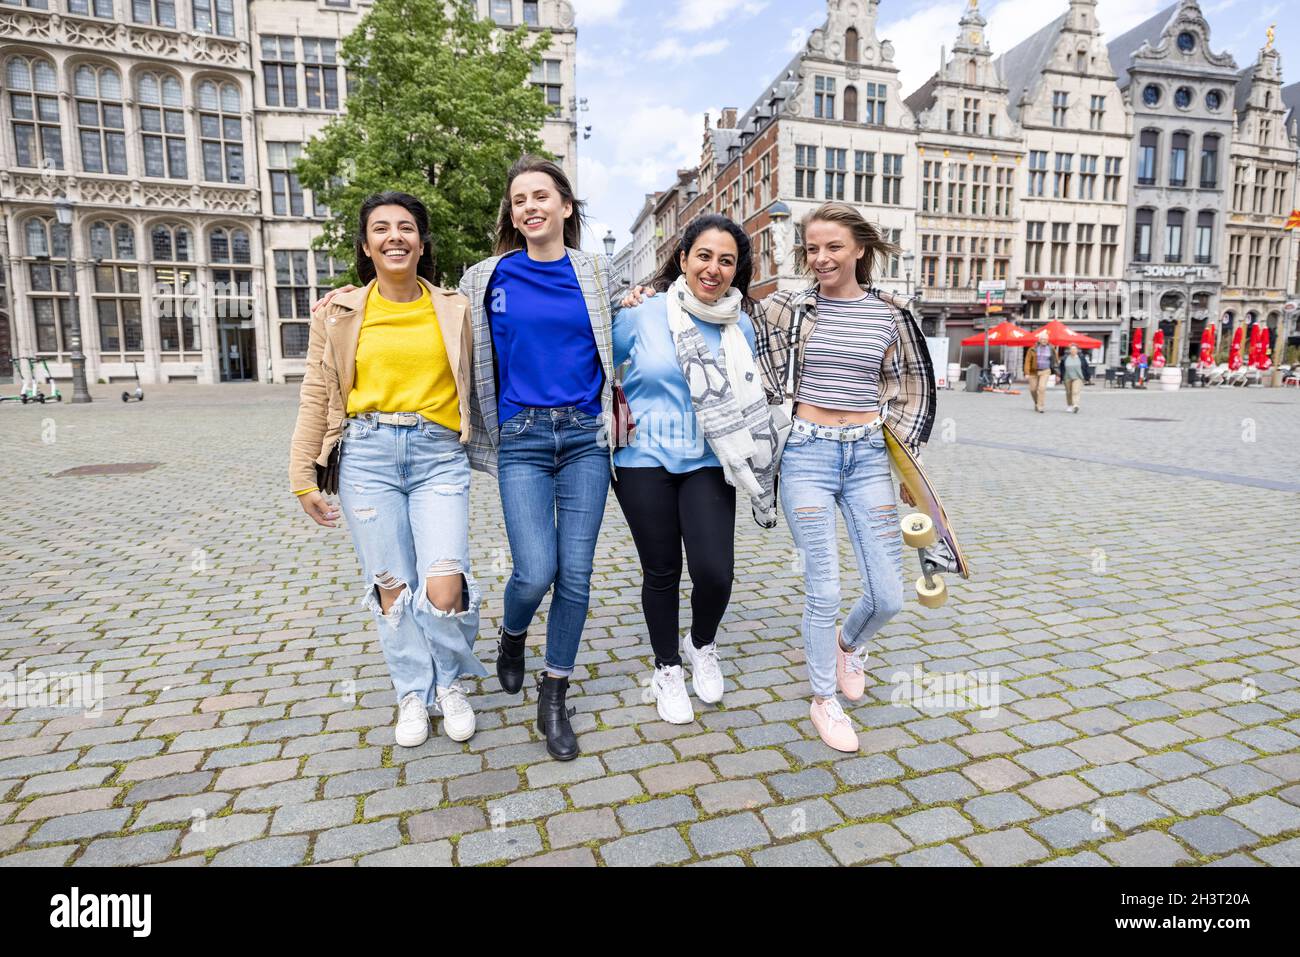 Lifestyle portrait of a diverse multiethnic group of four beautiful young women girlfriends walking around an european city and Stock Photo